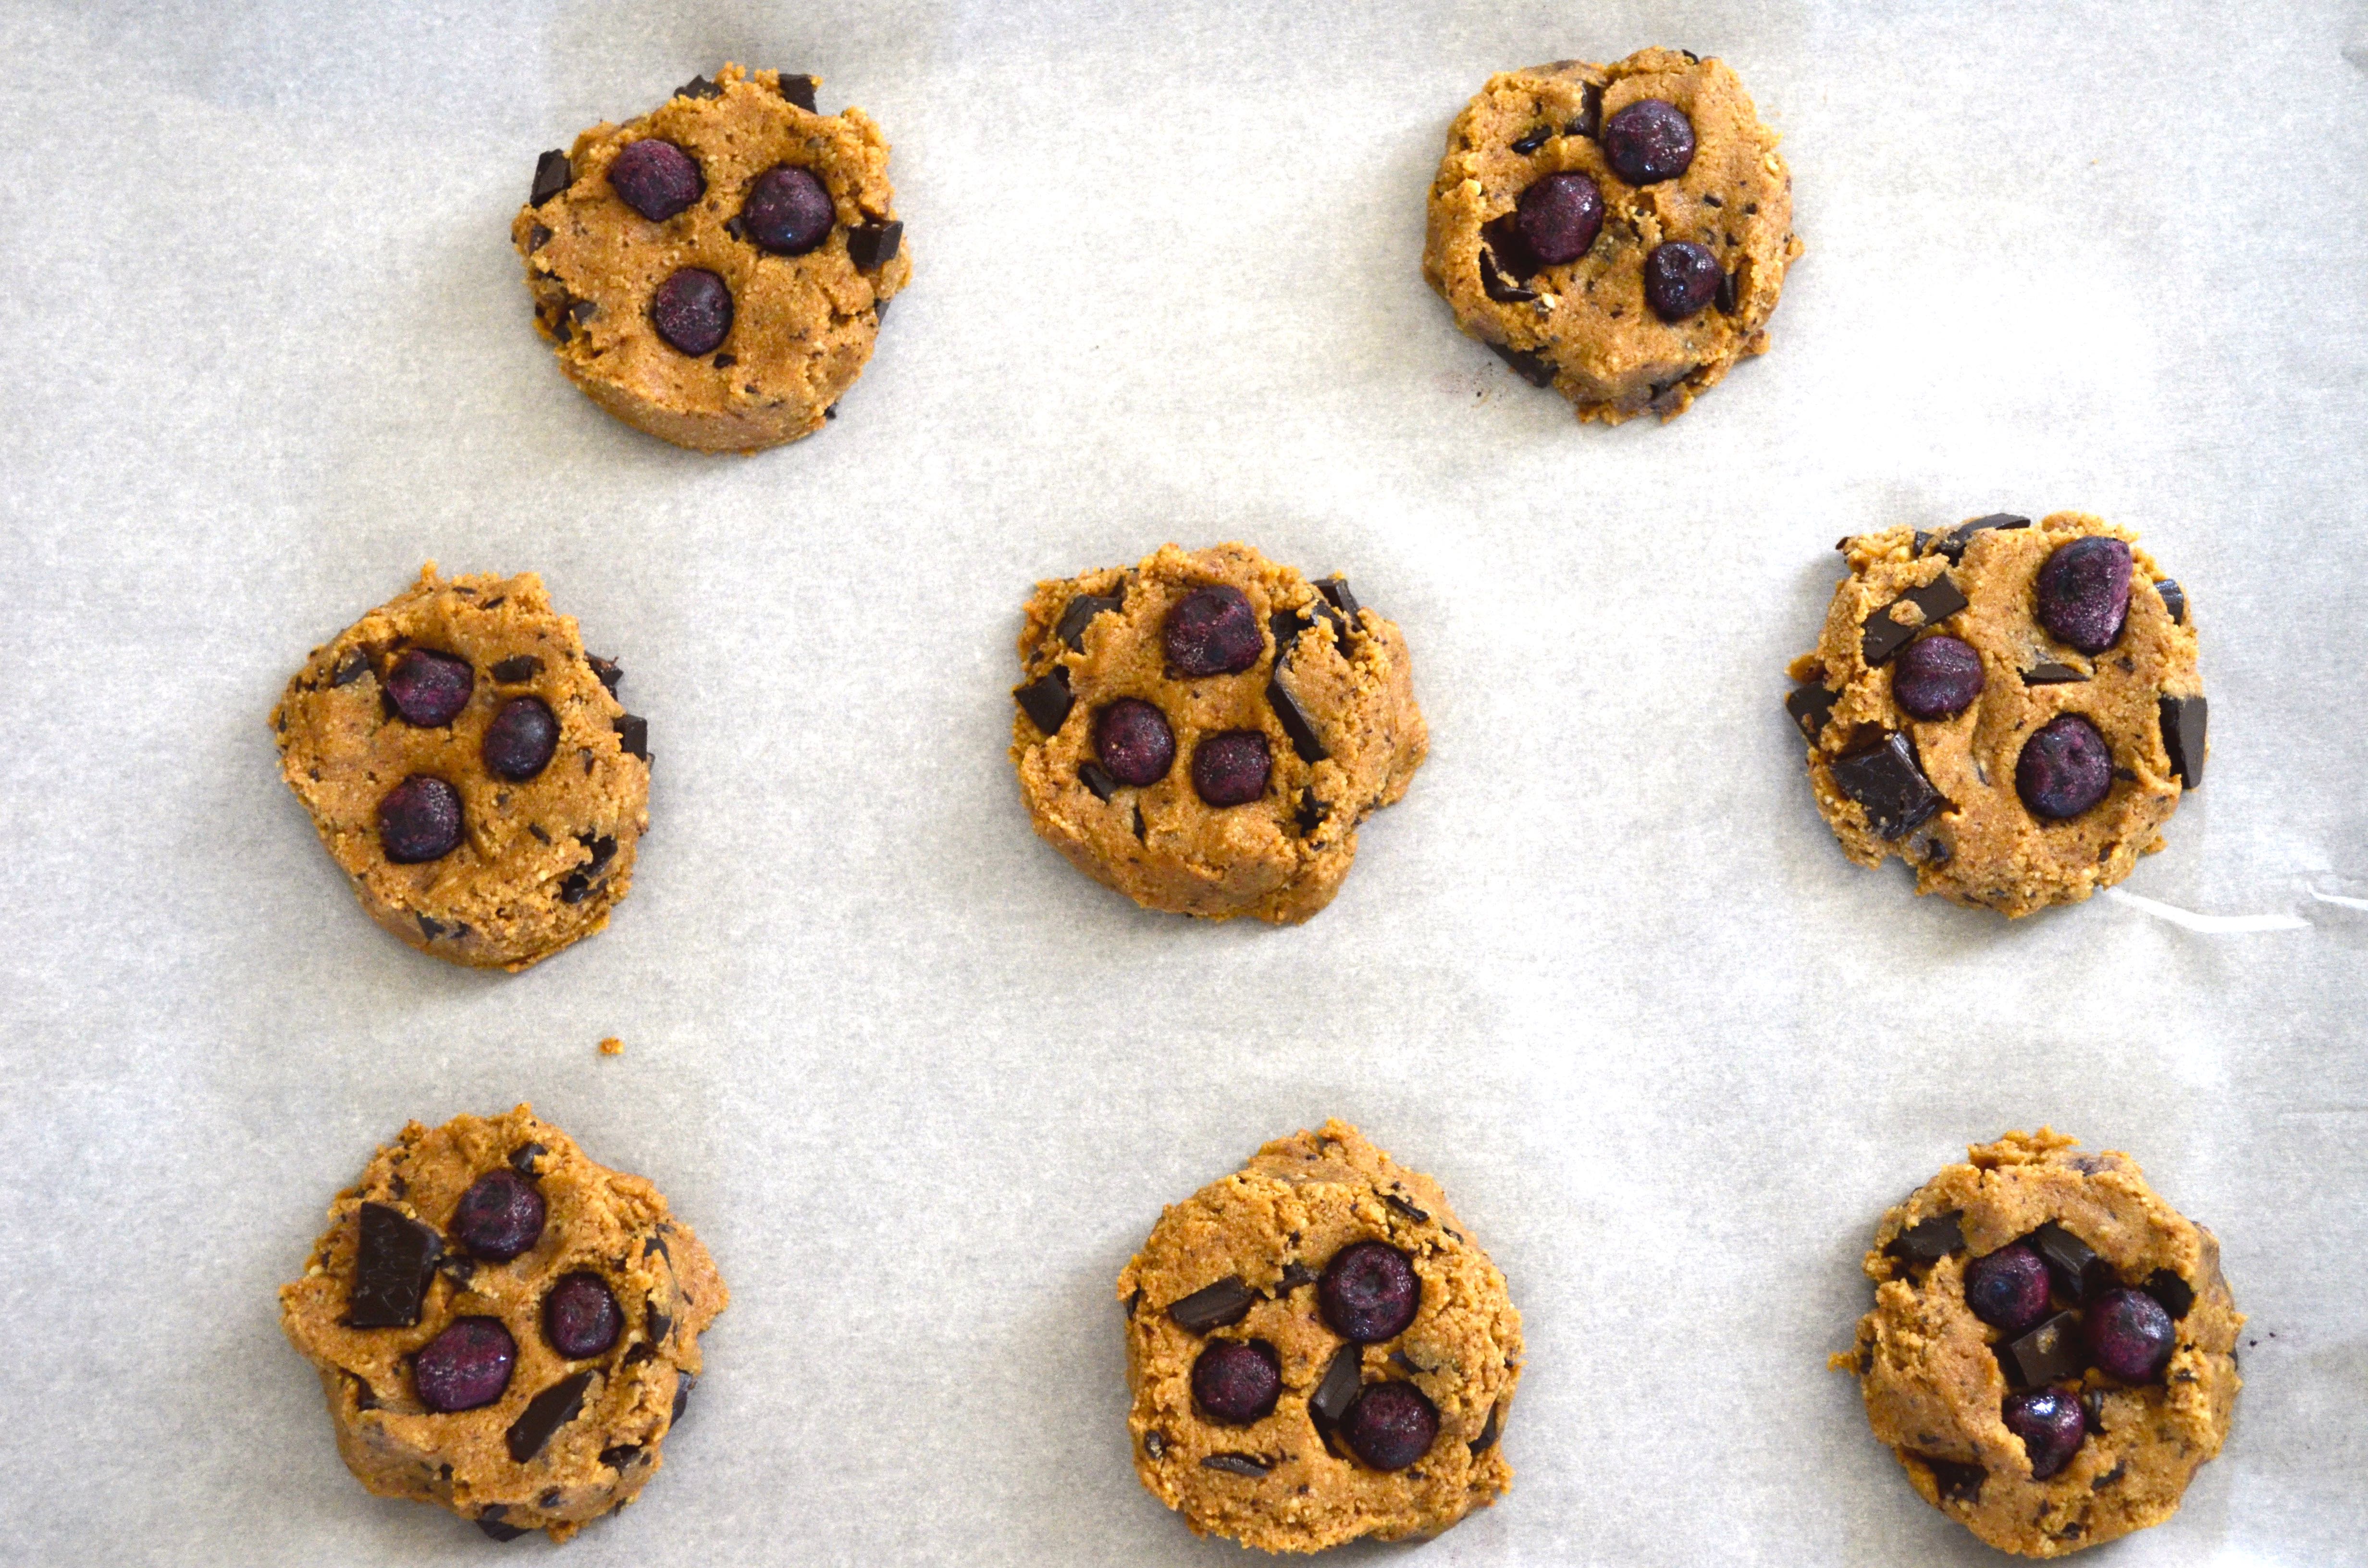 Healthy Chocolate Blueberry Cookies